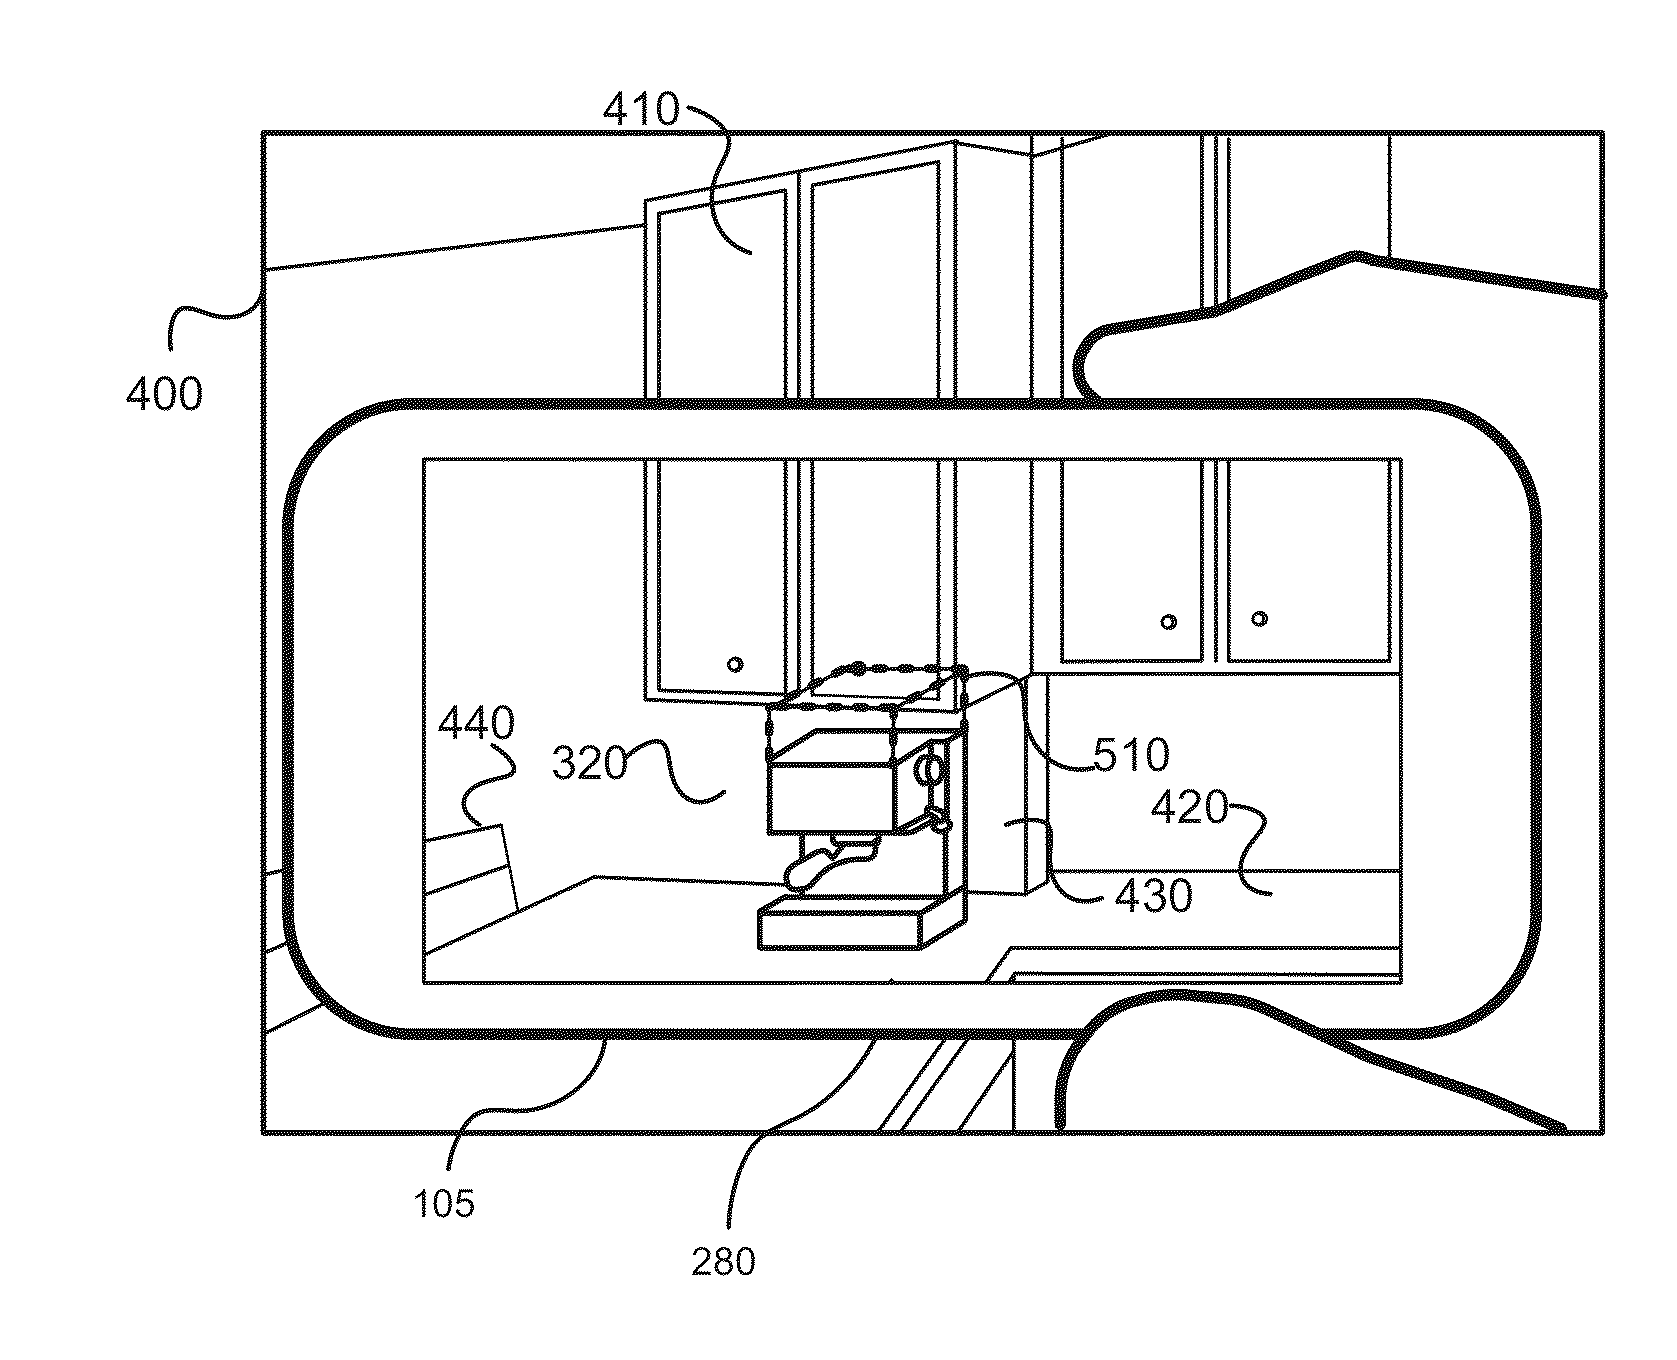 System and method for presenting true product dimensions within an augmented real-world setting